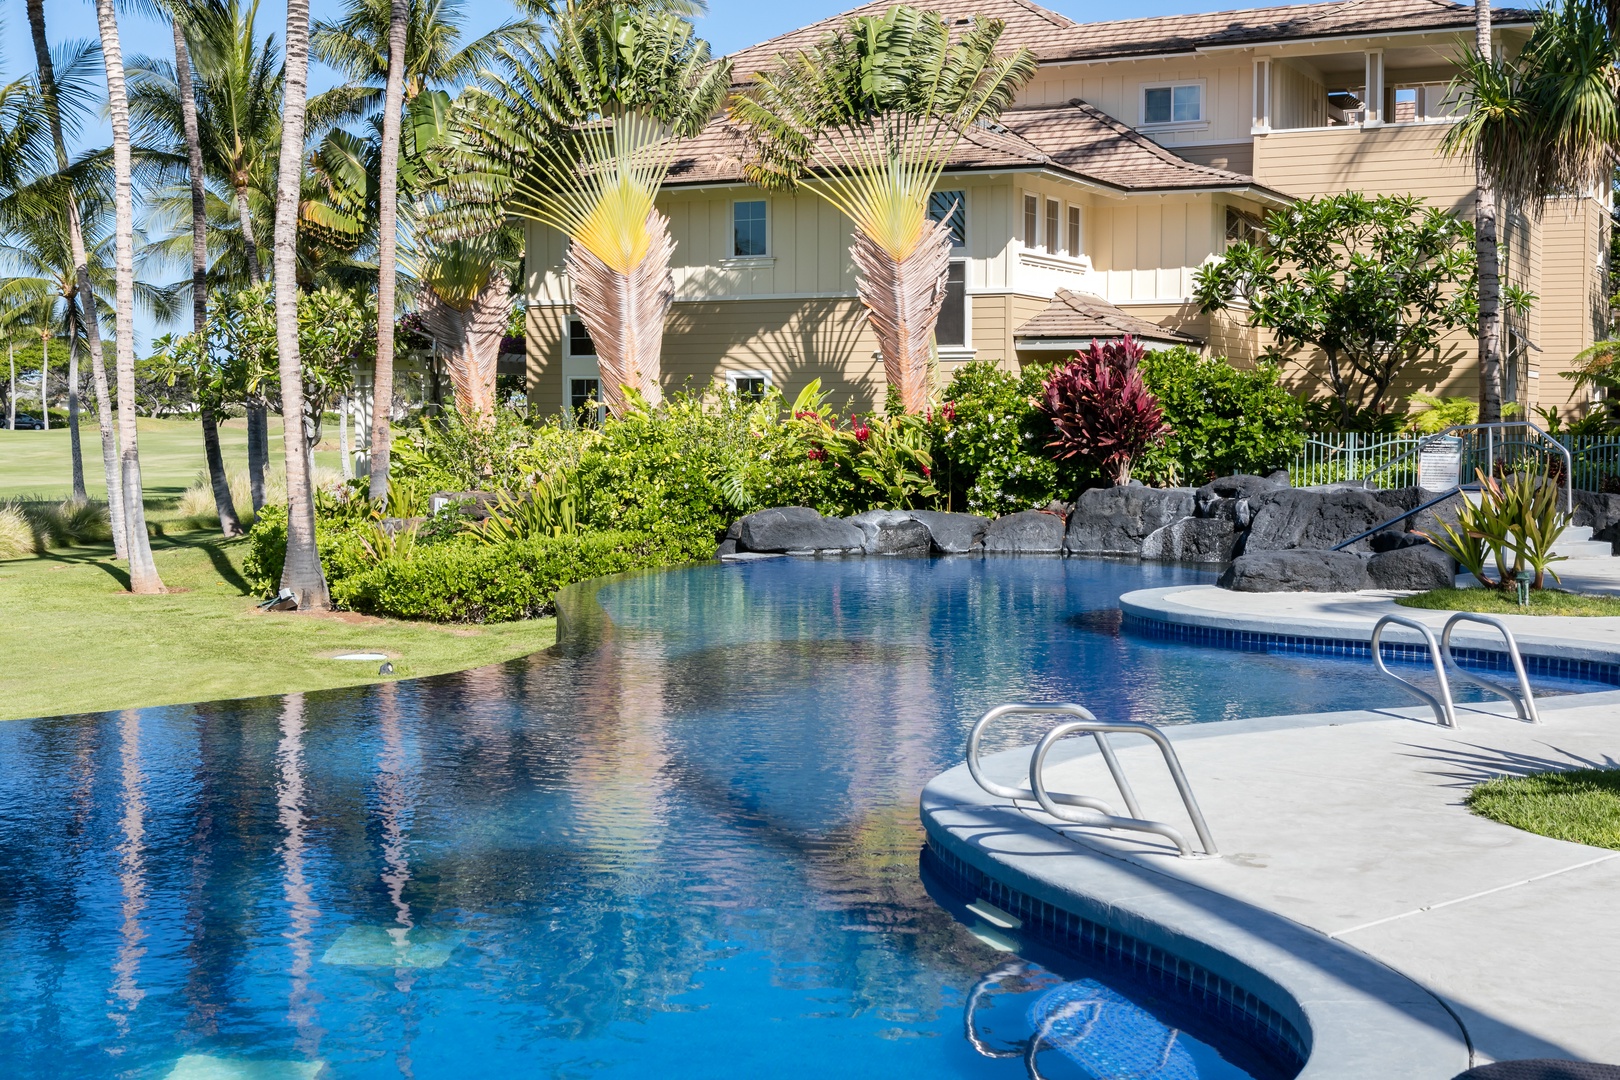 Waikoloa Vacation Rentals, Fairway Villas at Waikoloa Beach Resort E34 - Easy access to get in and out while you enjoy a refreshing dip in the pool